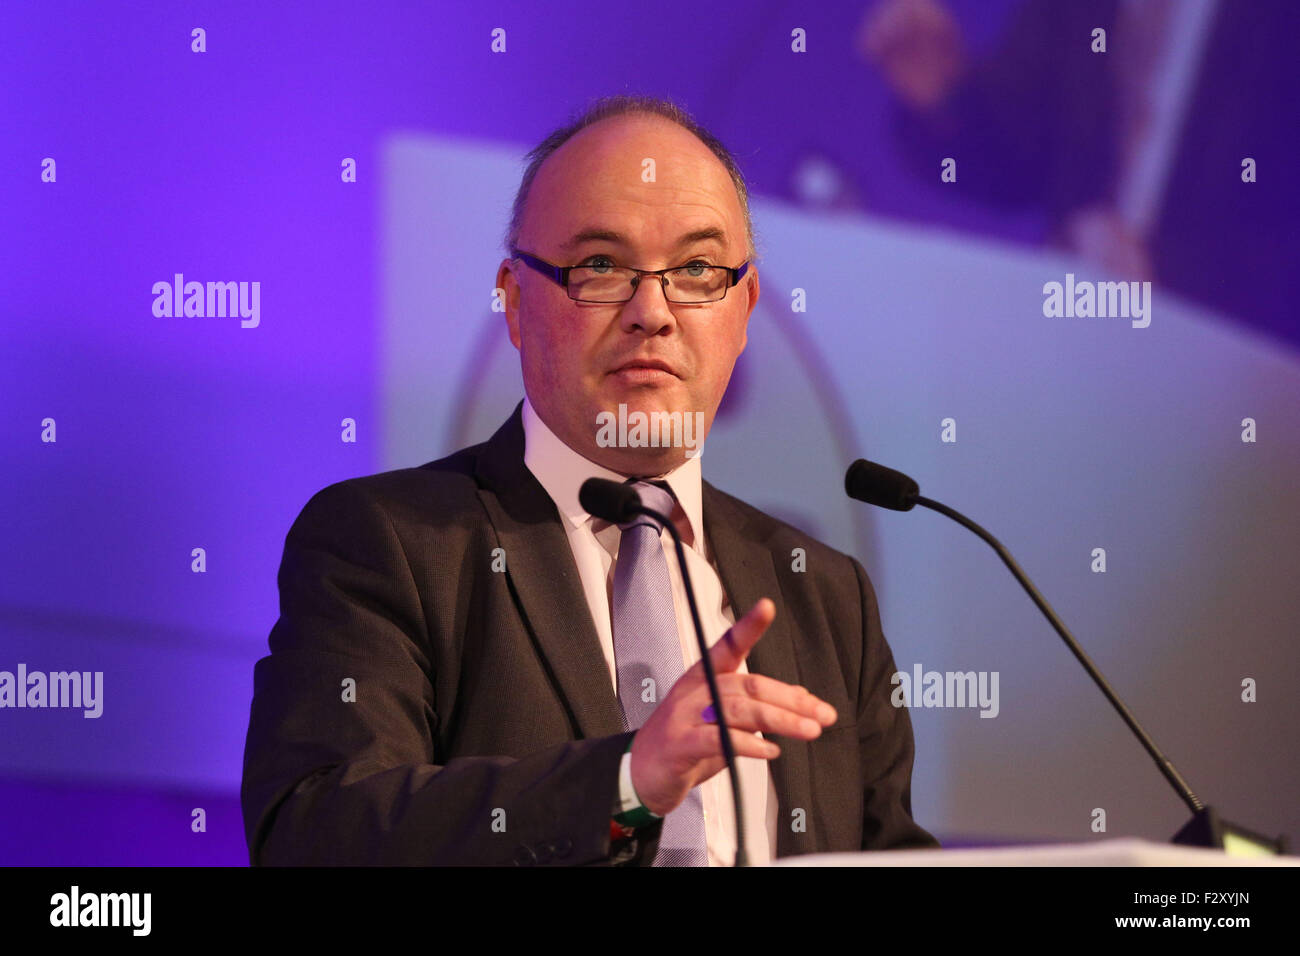 Doncaster, South Yorkshire, UK. 25th September, 2015. Andrew Allison, Head of Campaigns at the Freedom Association, speaks at the UKIP National Conference in Doncaster South Yorkshire, UK. 25th September 2015. The party's annual conference was the stage for the unveiling of a new campaign force called 'Leave EU'. Consisting of pressure groups and think tanks with thousands of activists between them it will aim to end the UK’s ties with Brussels.  Ian Hinchliffe / /Alamy Live News Stock Photo